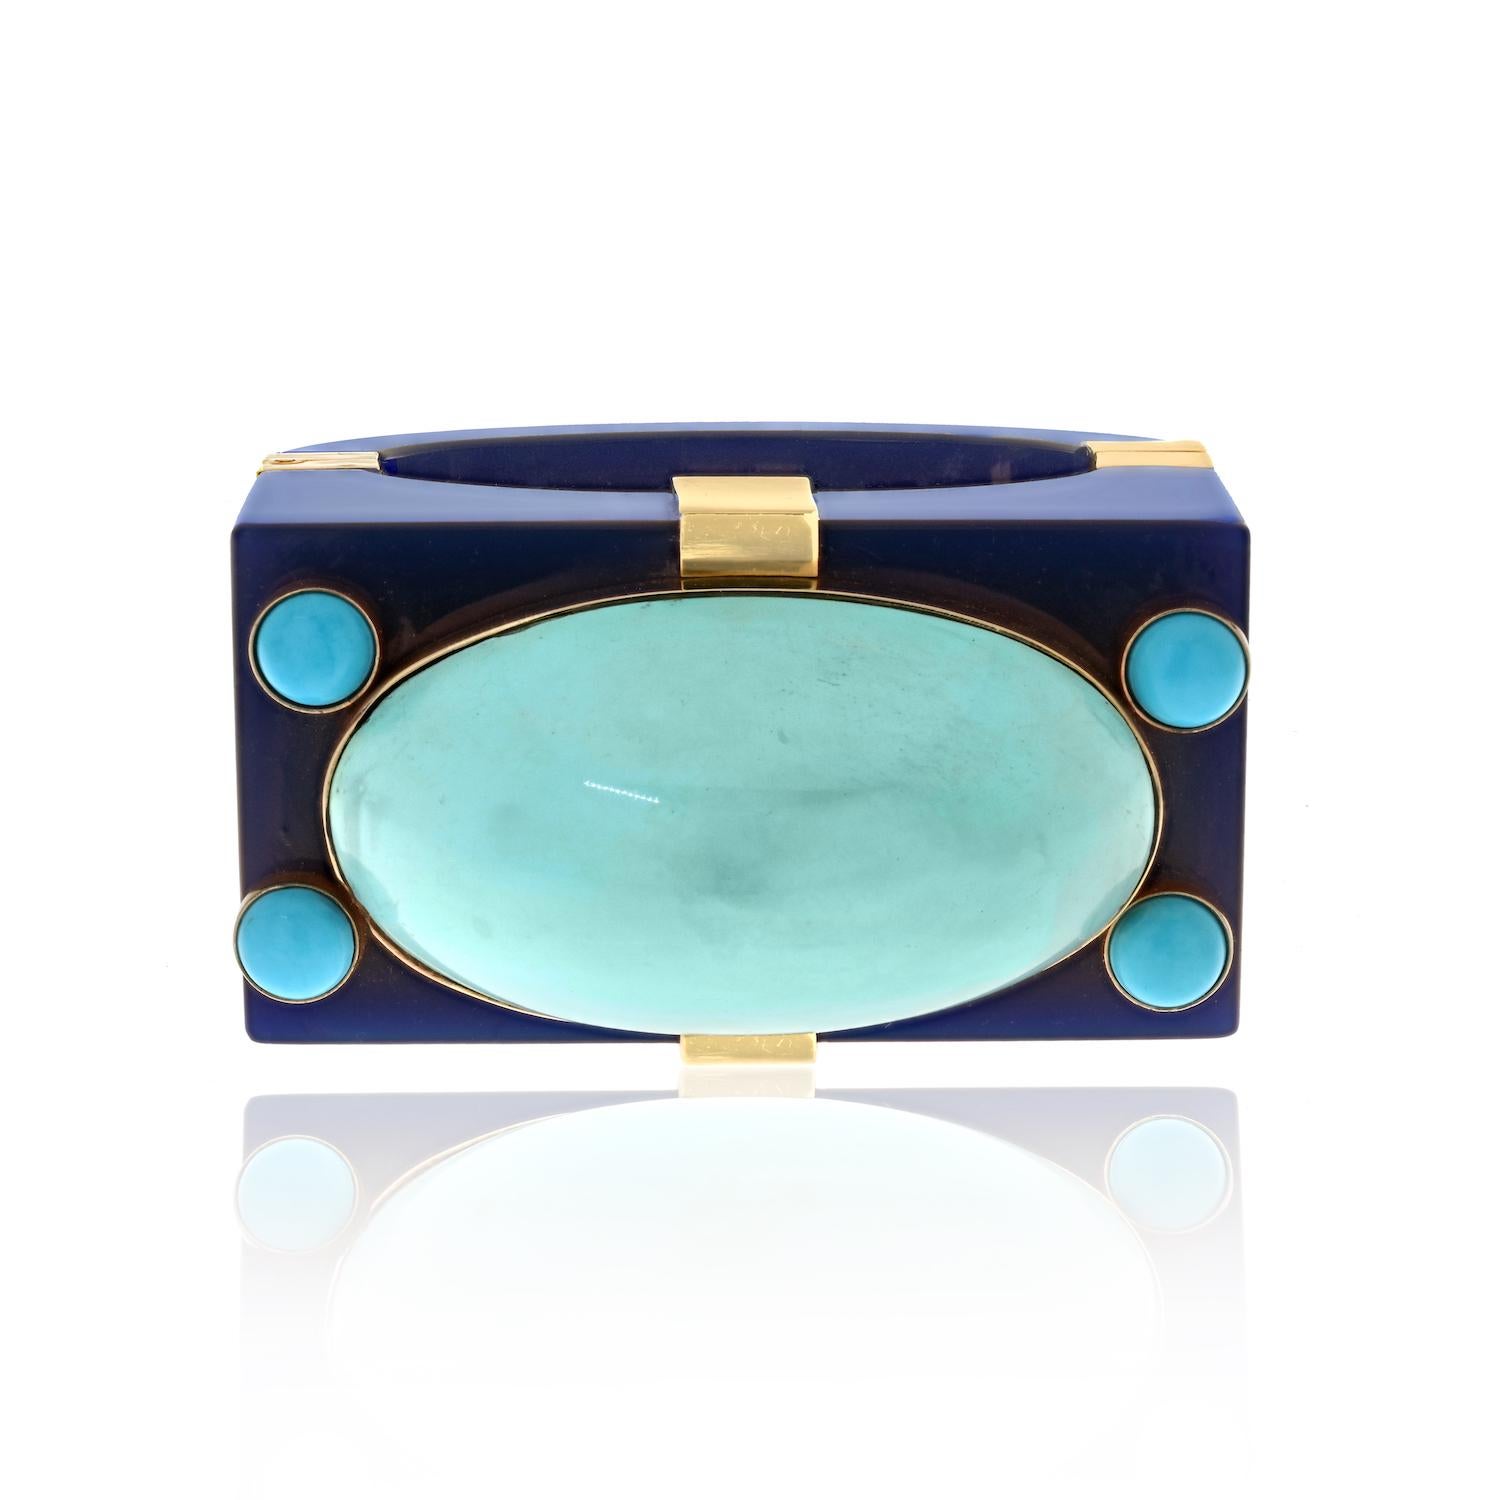 This Seaman Schepps architectural bracelet from the 1950s is a true testament to the unique design aesthetics of that era. Crafted in 14k yellow gold and featuring elements of bakelite and turquoise, it's not just a bracelet; it's a work of